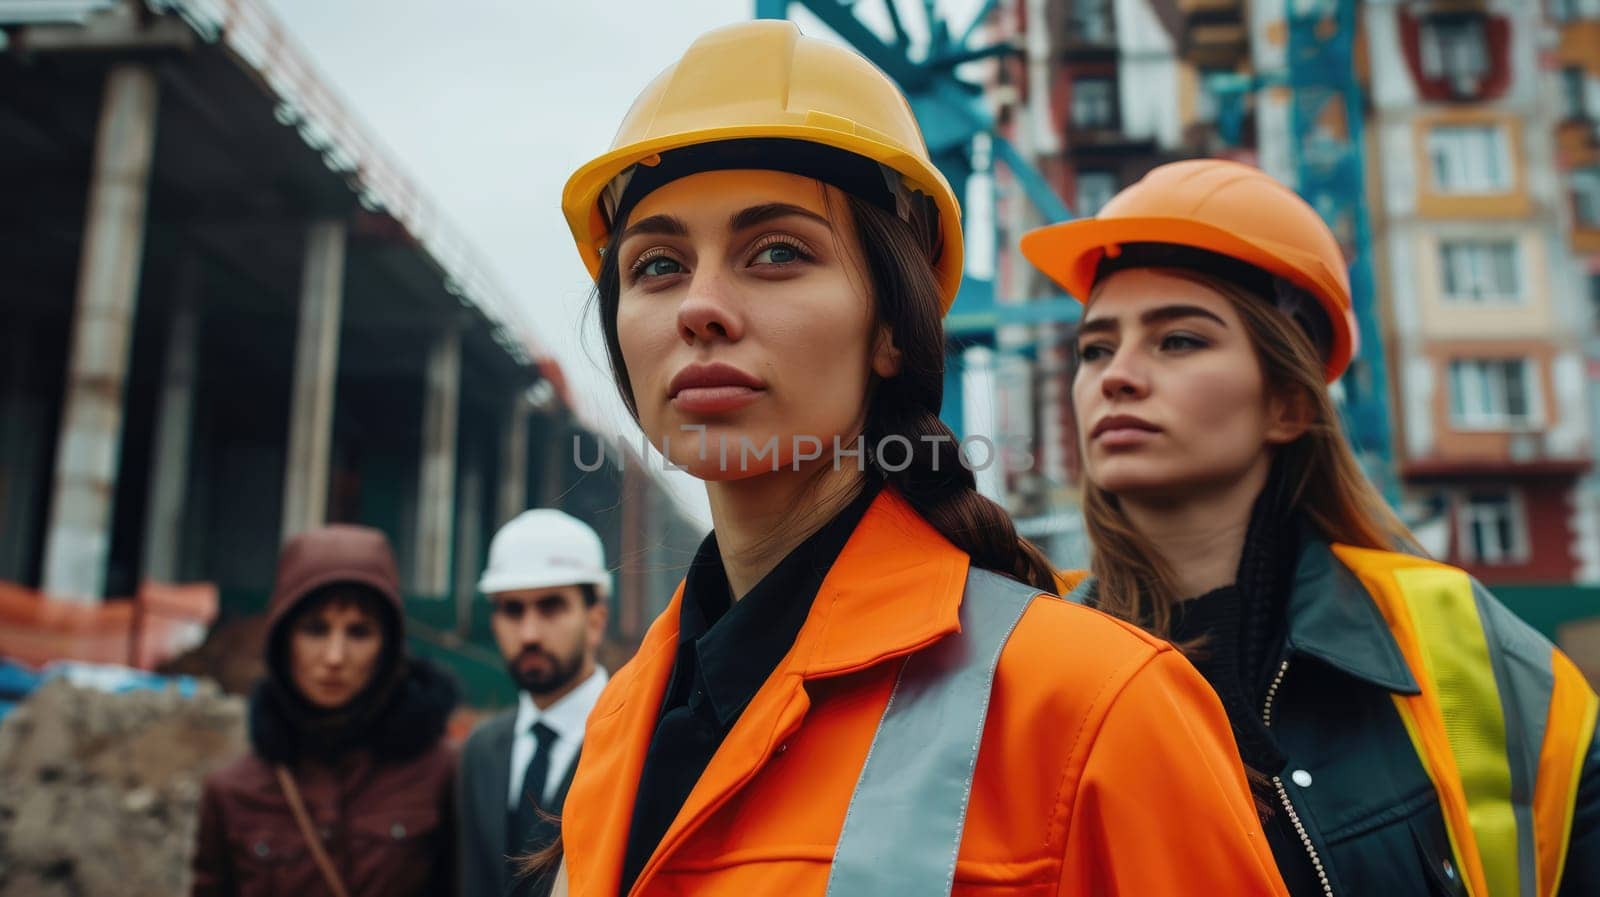 Construction concept of Engineer or Architect working. A woman foreman at a construction site manages the project. AI